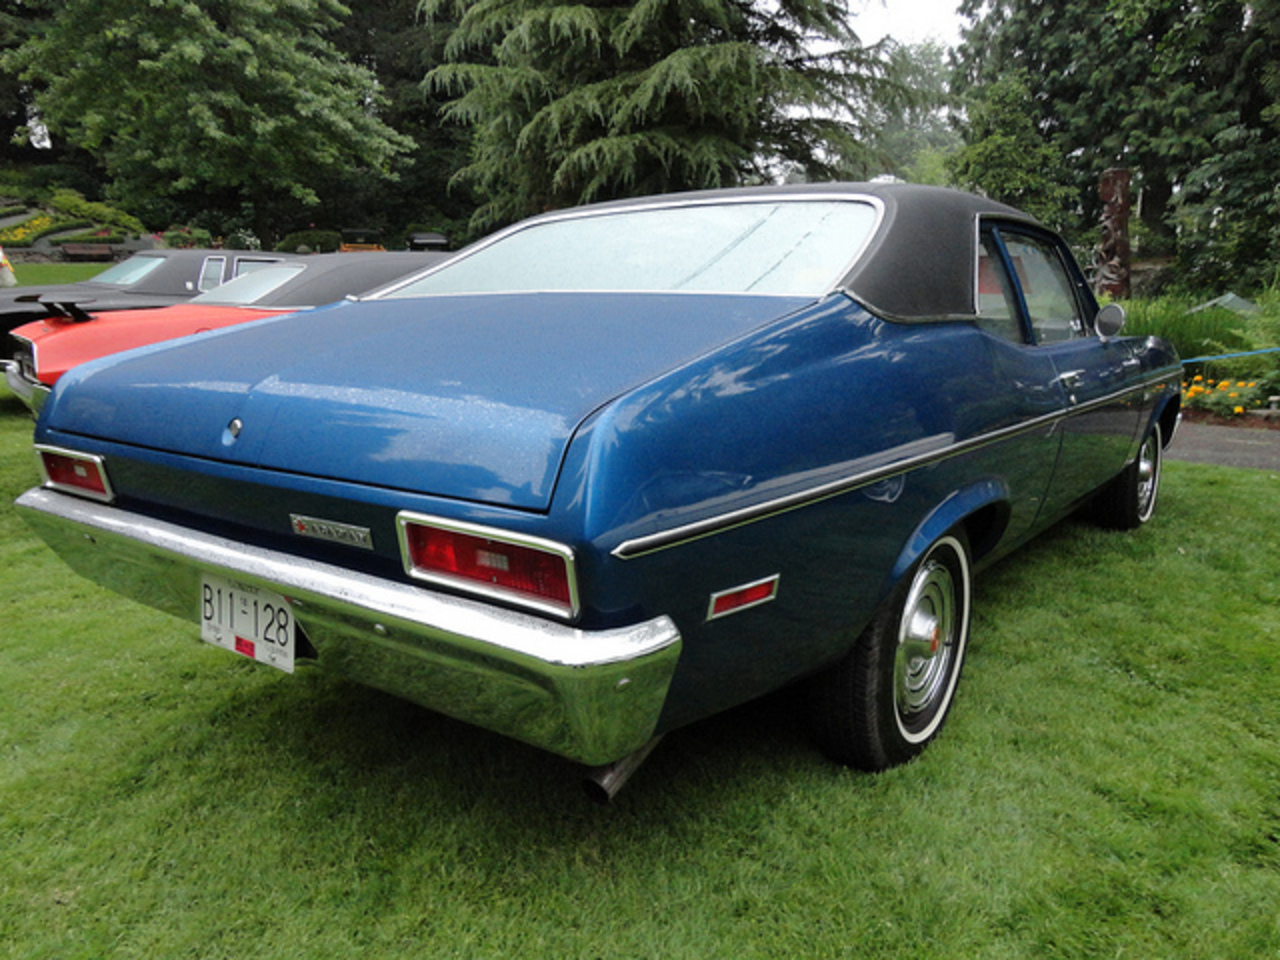 1970 Pontiac Acadian Coupe | Flickr - Photo Sharing!